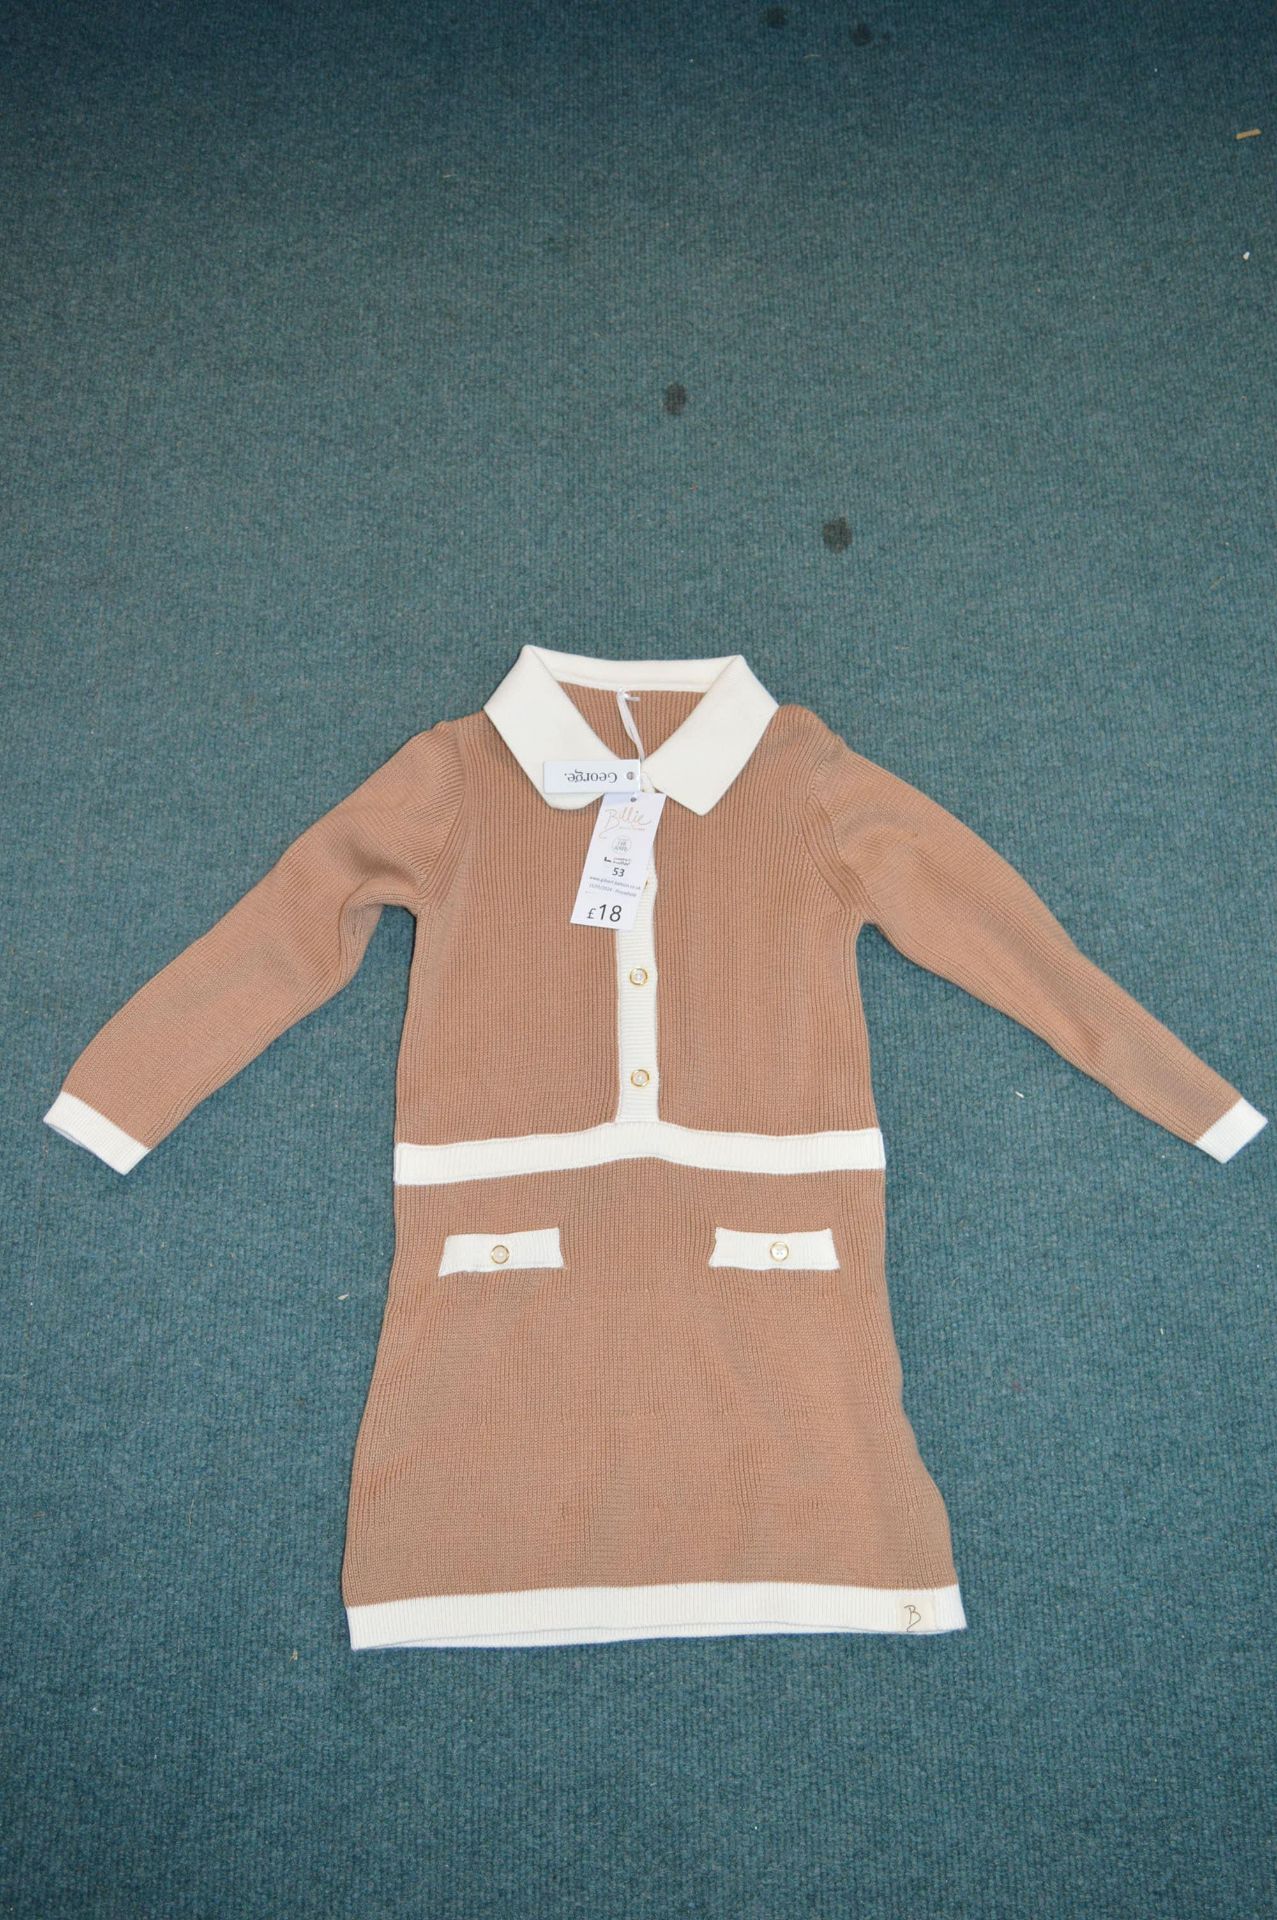 George Girl's Jumper Dress Size: 3-4 years